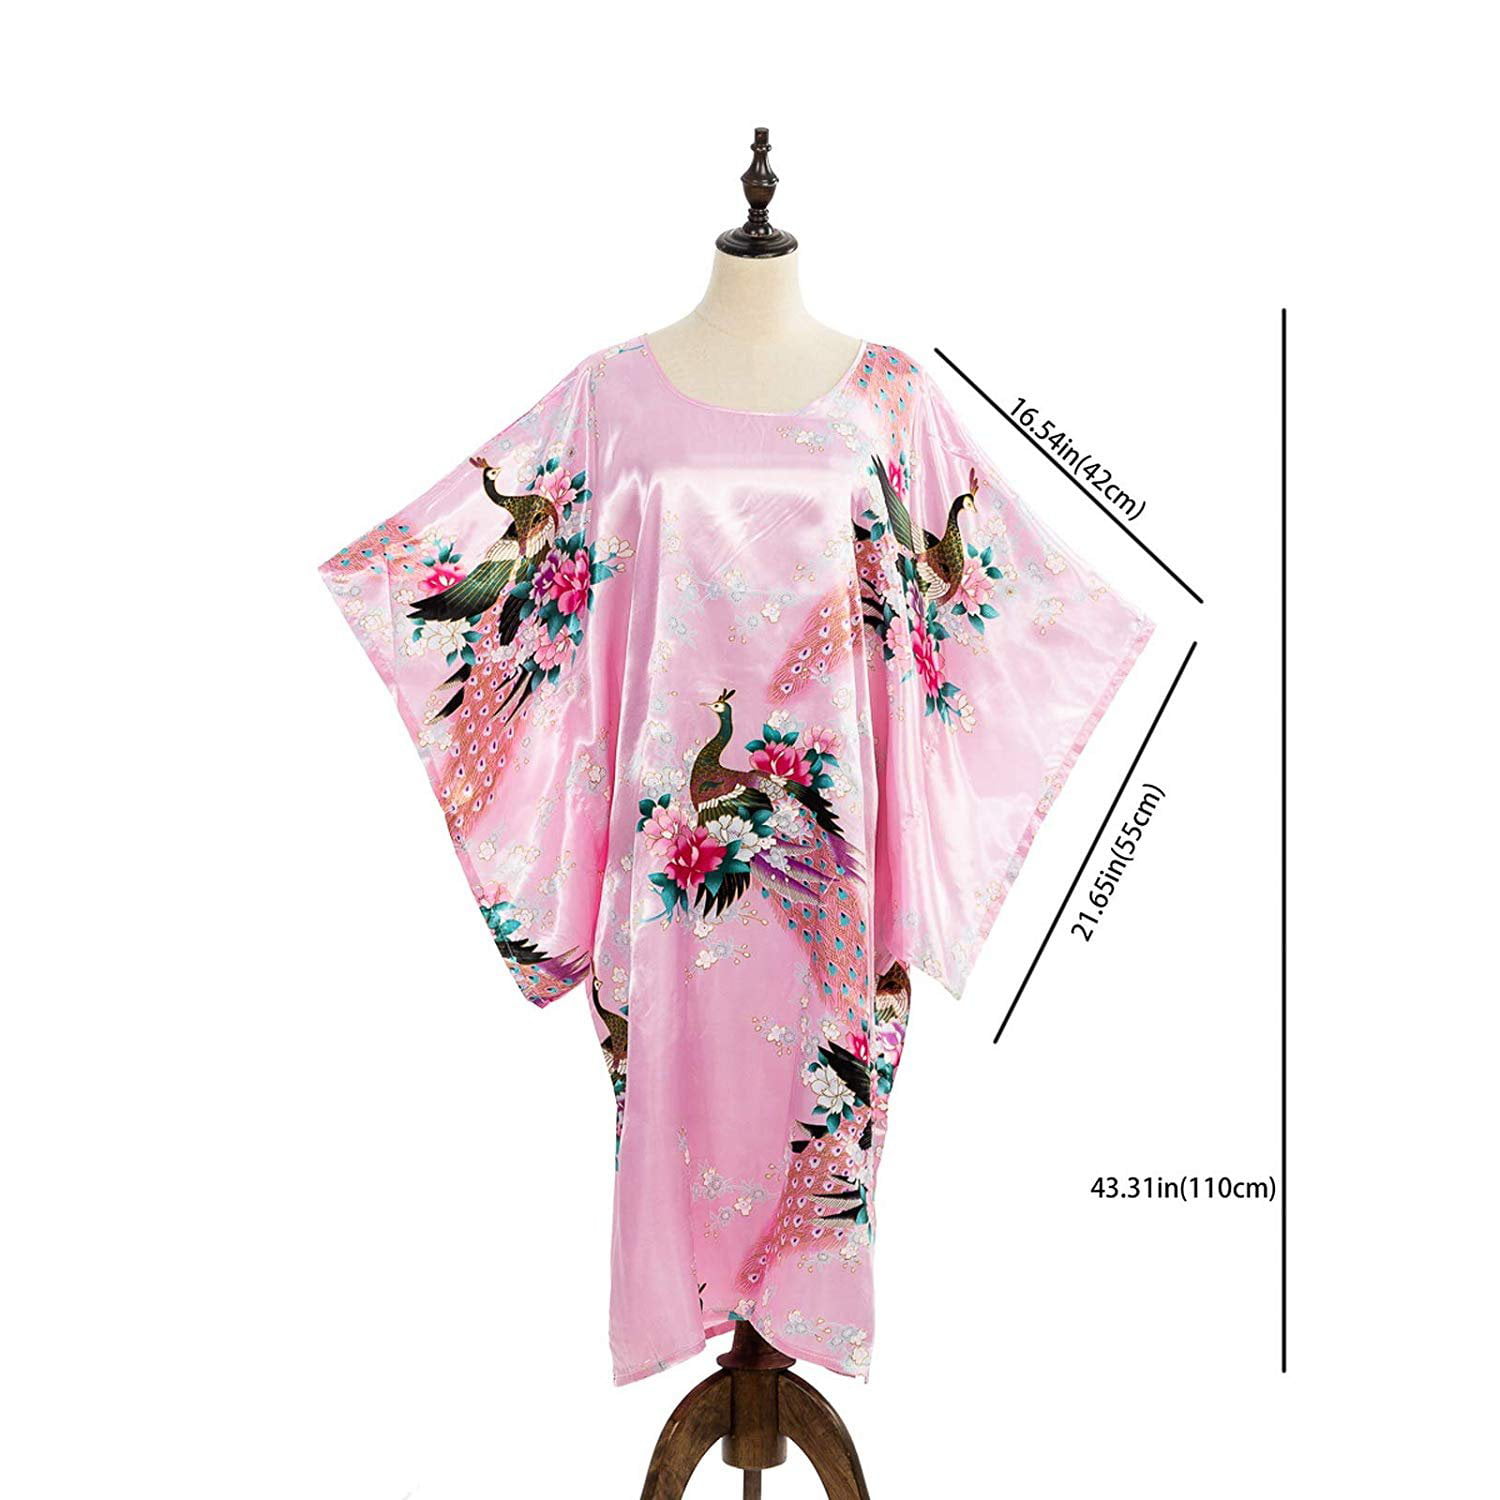 19 Japanese lady traditional kimono peacock floral dress ball gown size  Asian Sz